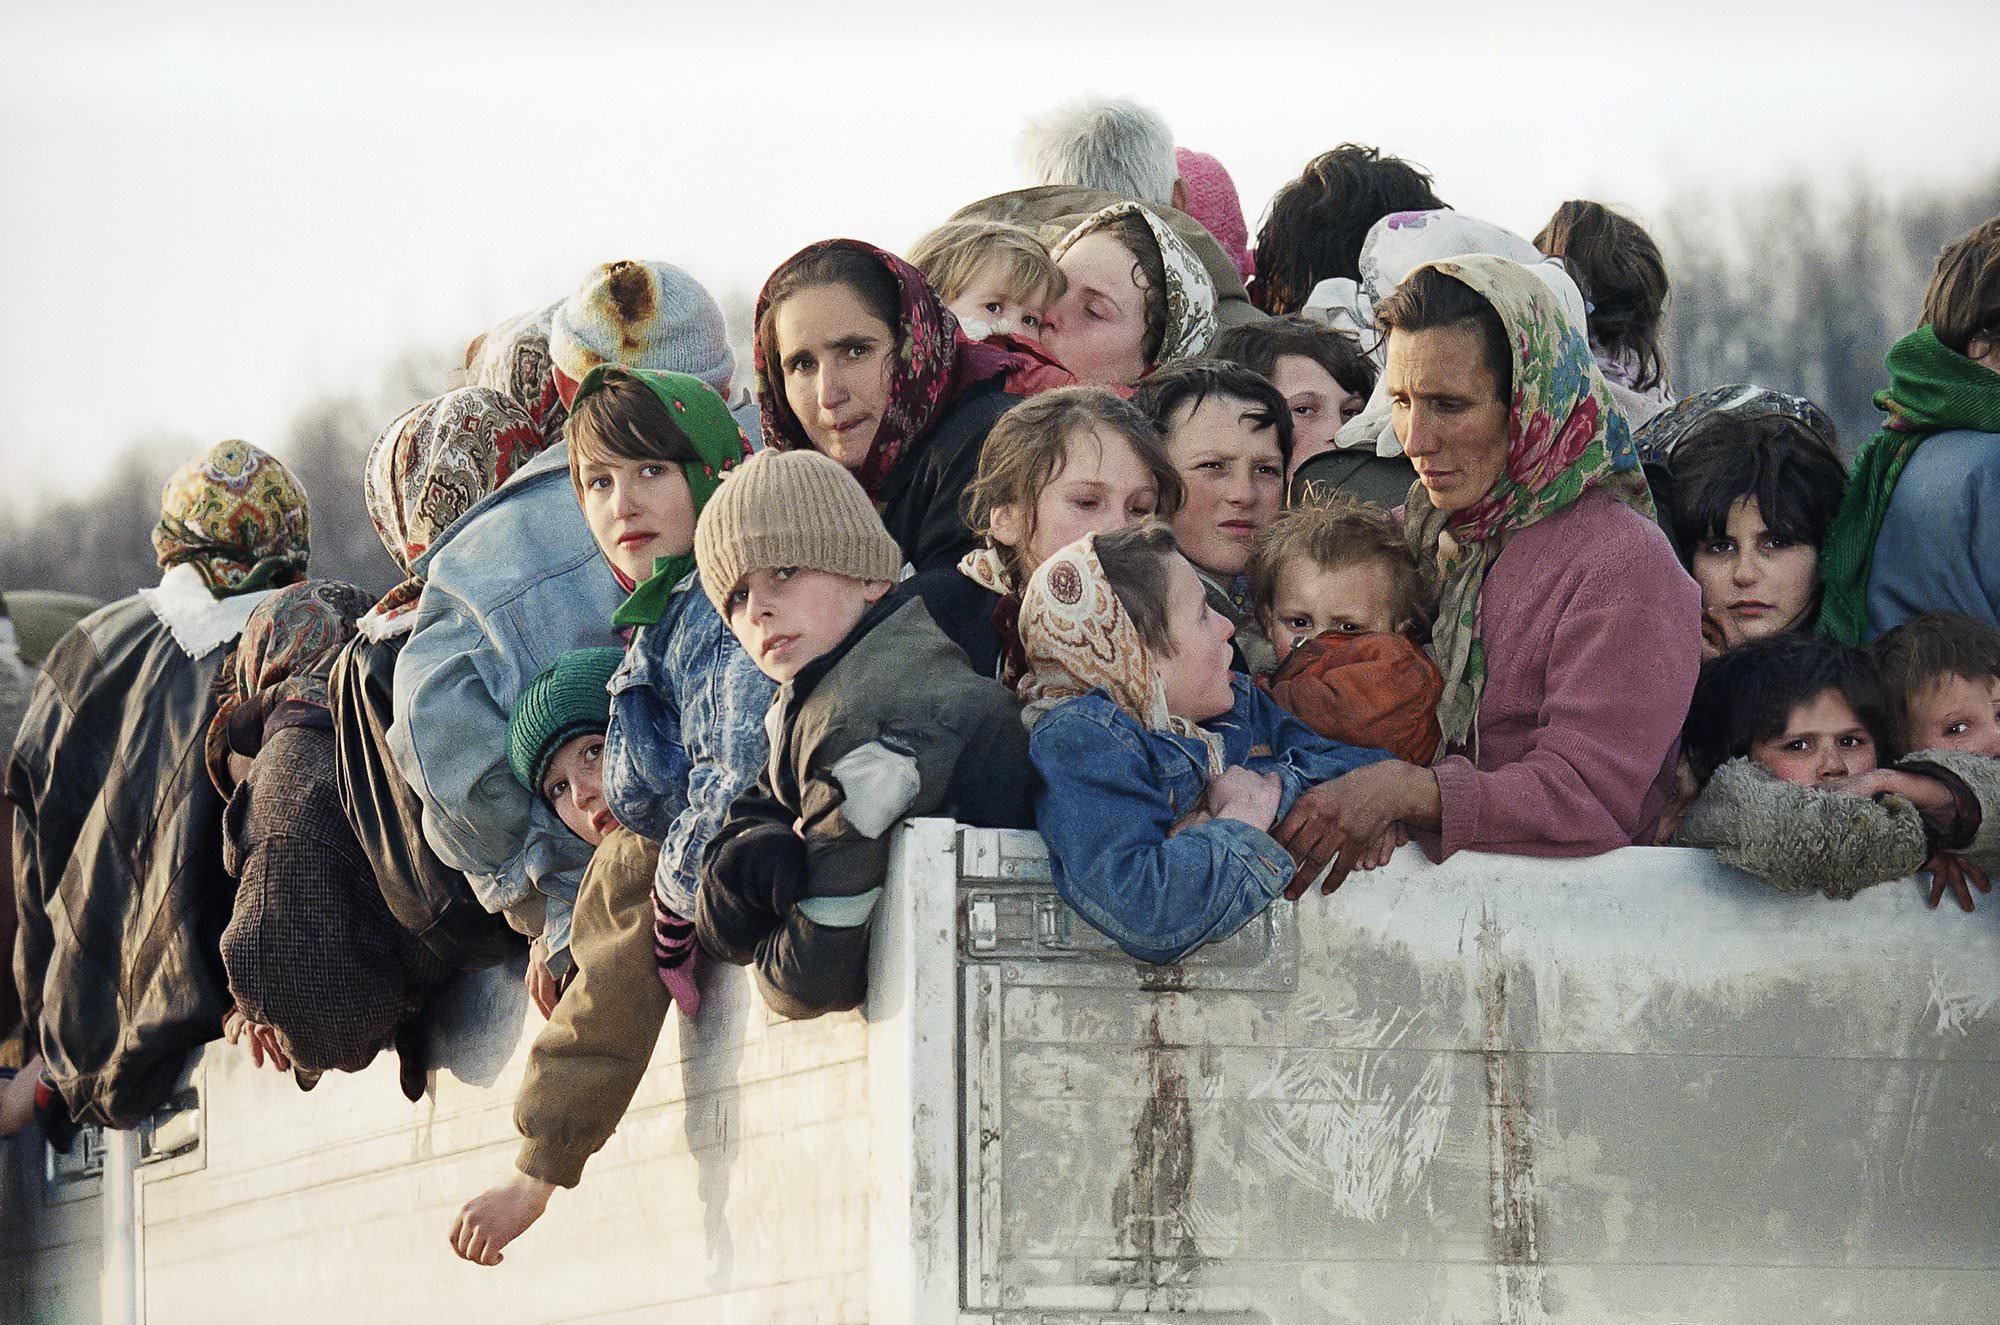 Evacuees from the besieged Muslim enclave of Srebrenica, packed on a truck en route to Tuzla, pass through Tojsici, March 29, 1993.